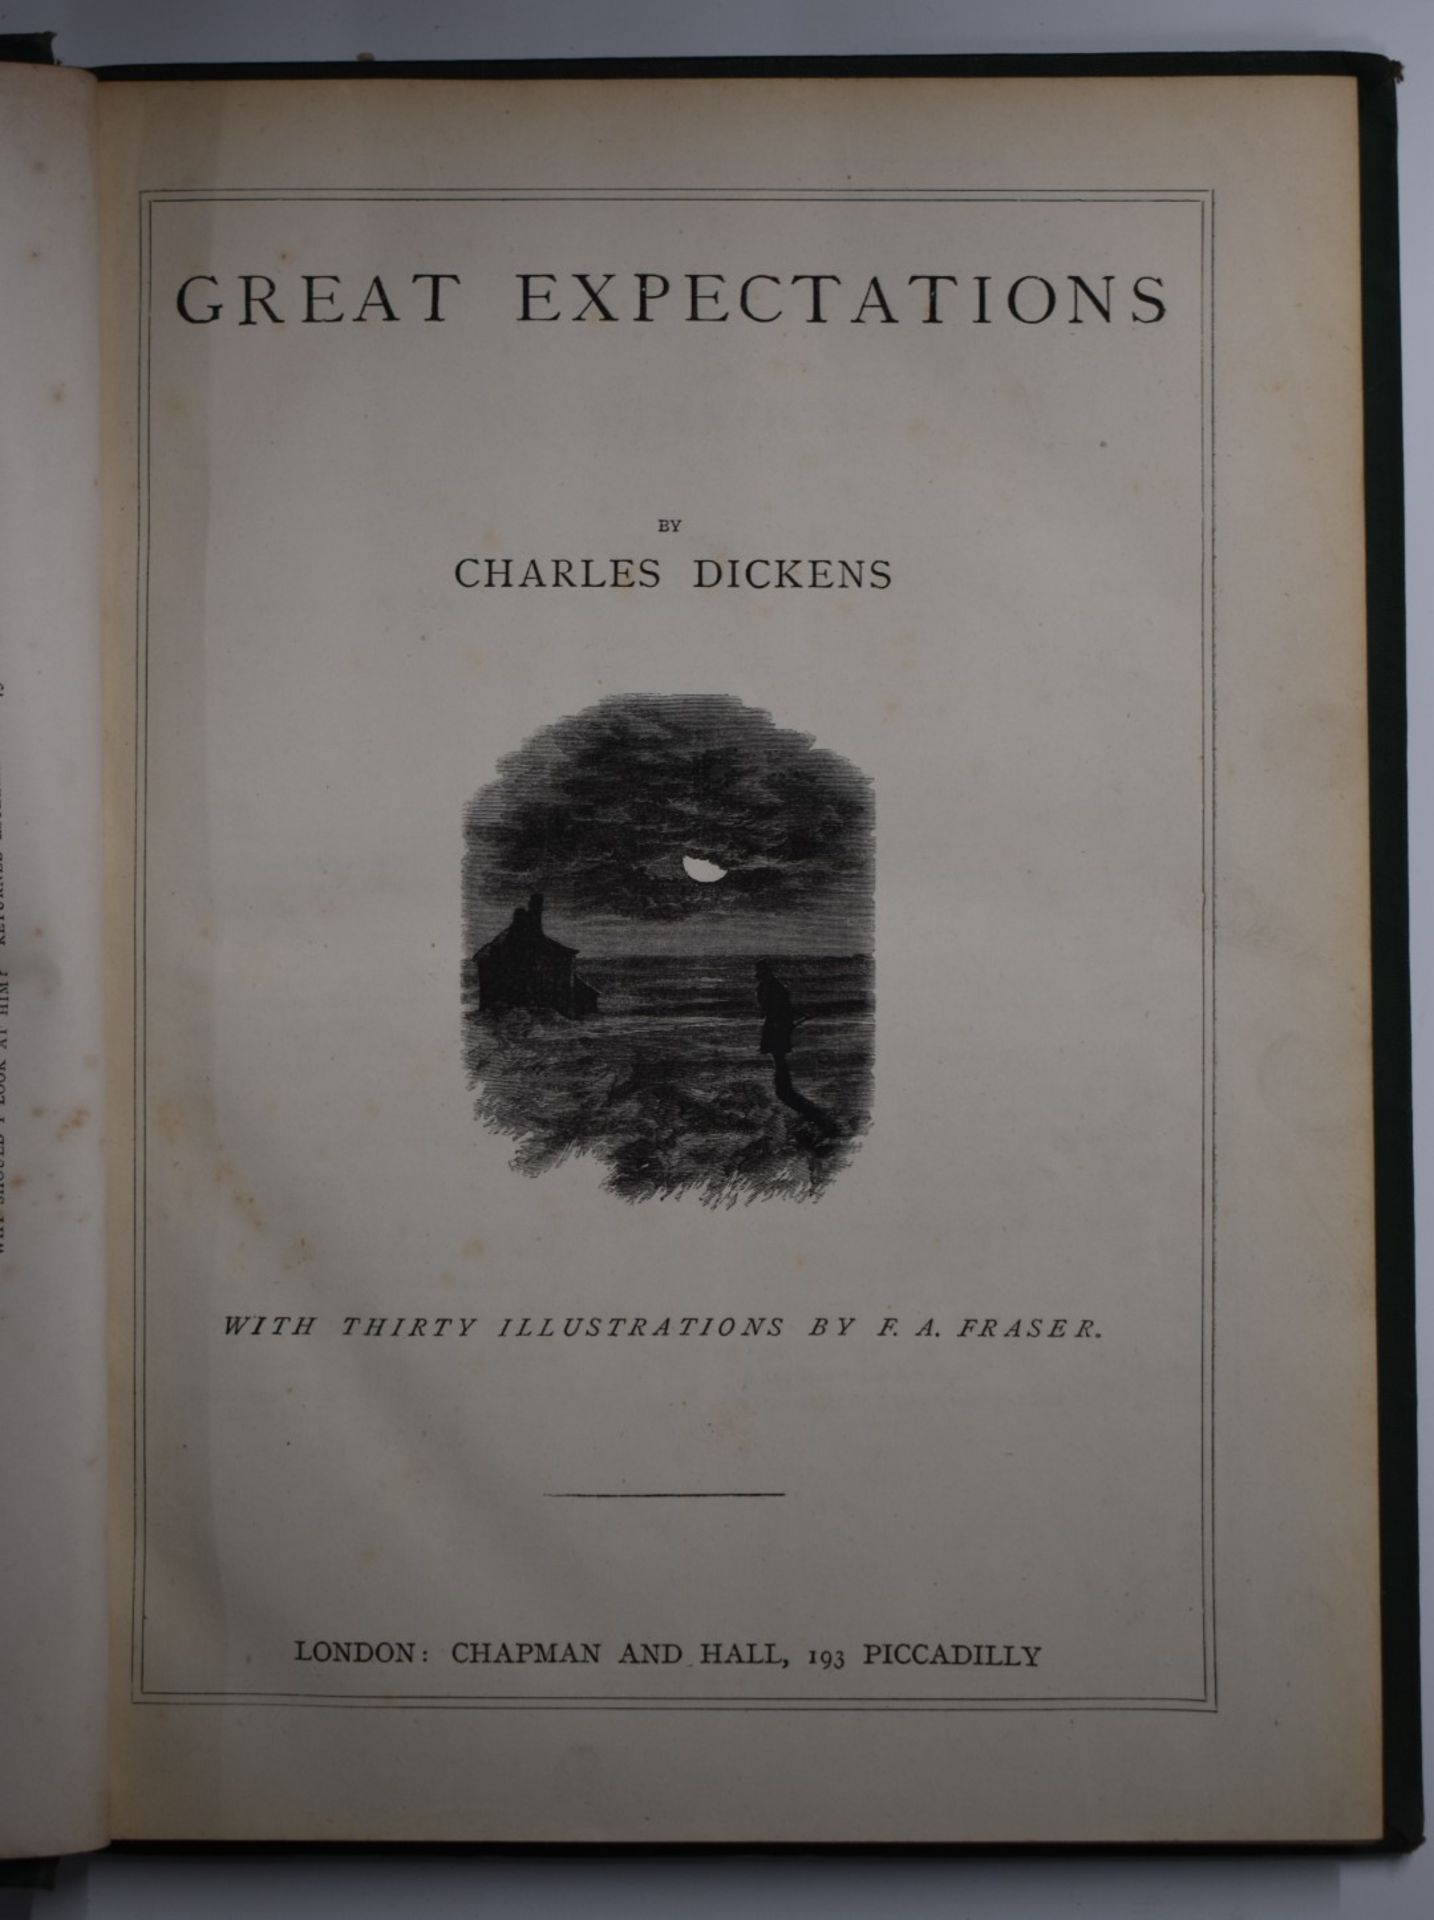 The Works of Charles Dickens (Household Edition) published Chapman & Hall (c.1870) illustrated by F. - Image 3 of 3